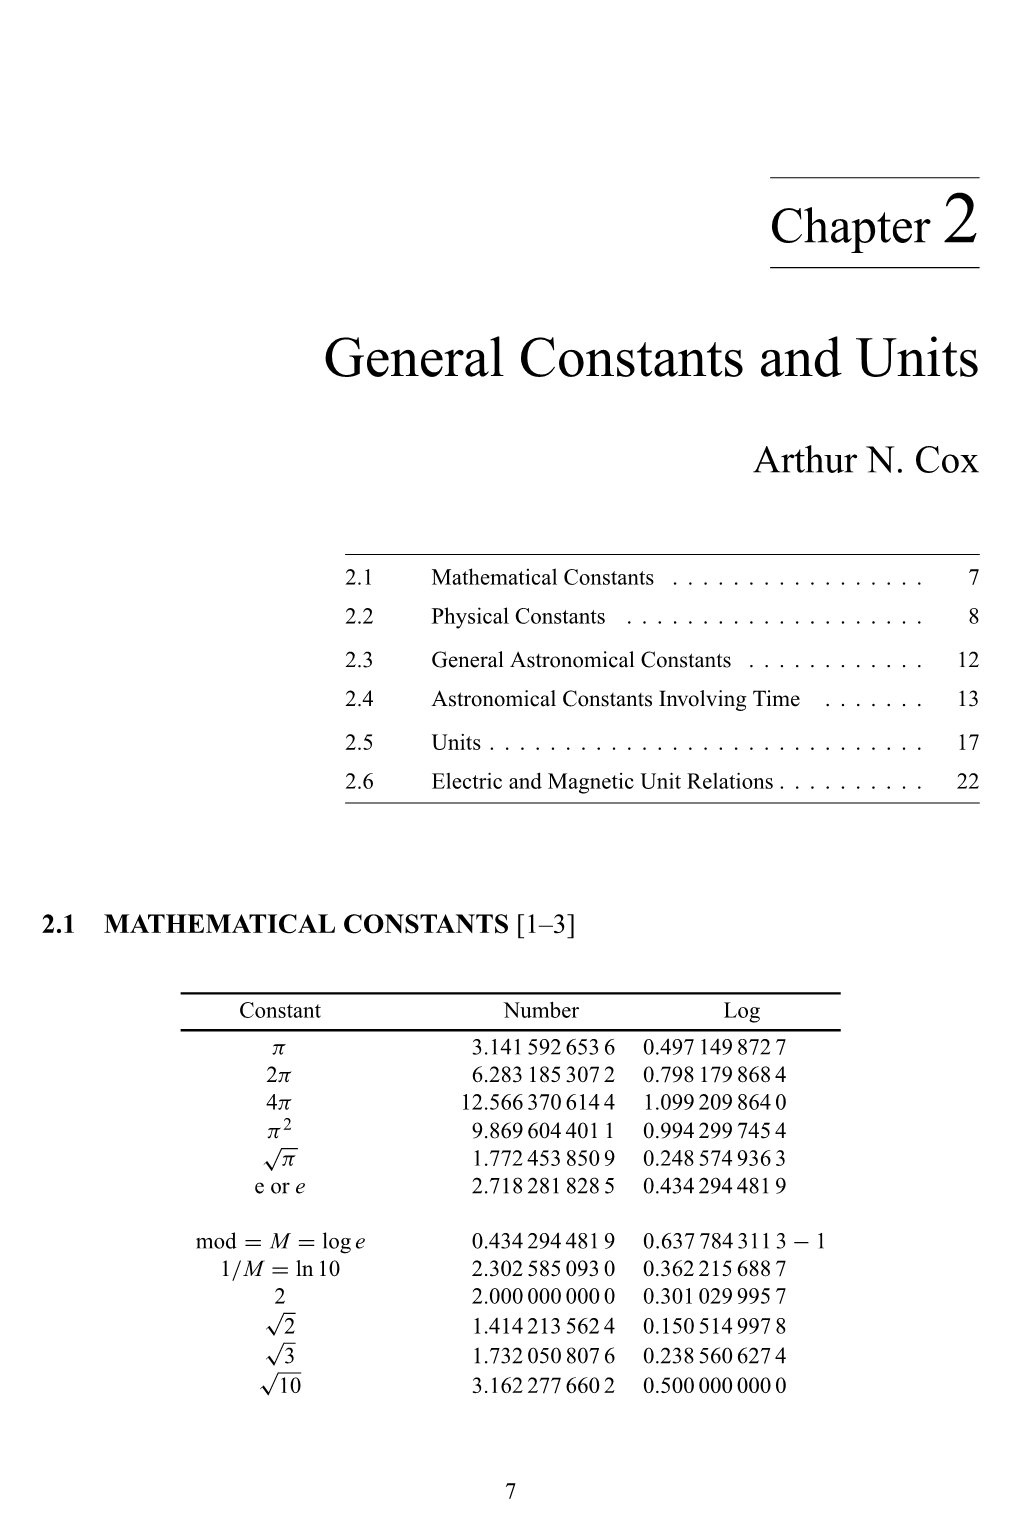 General Constants and Units